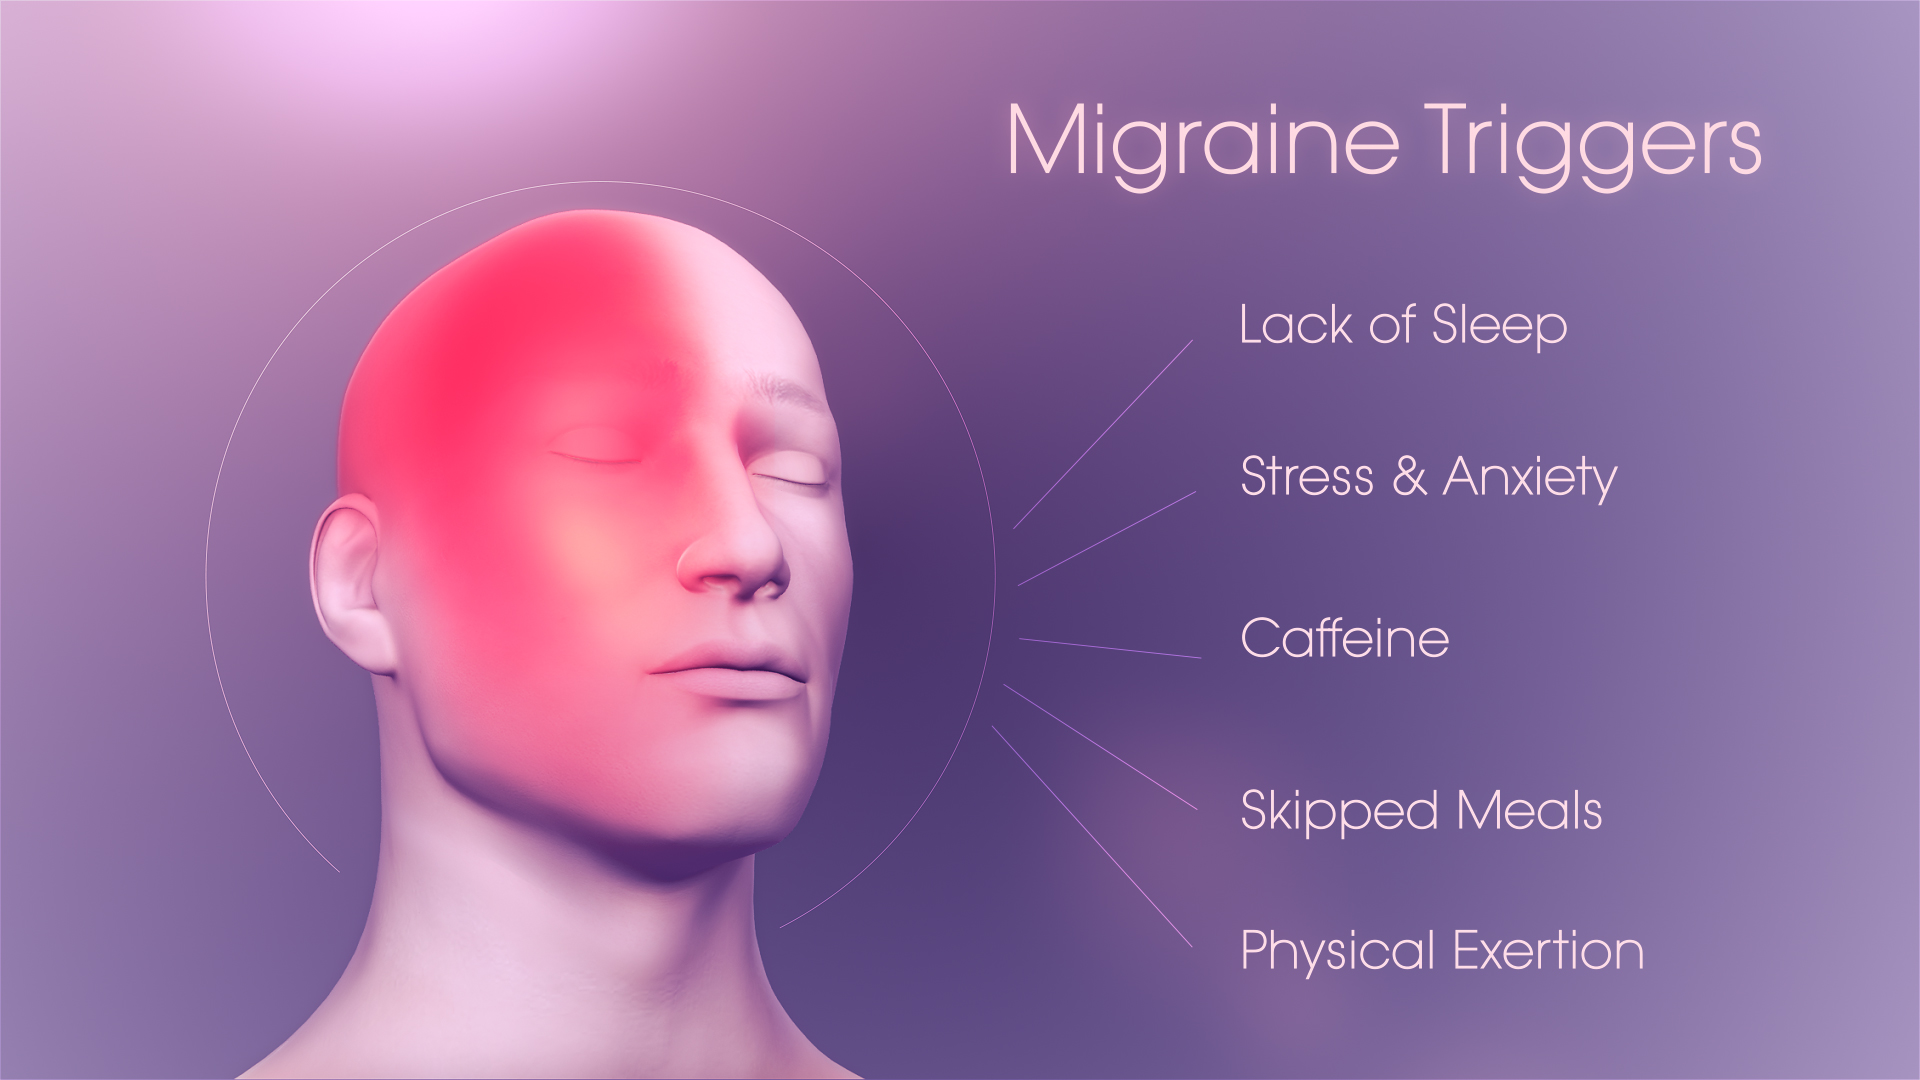 What is the main cause of migraines?